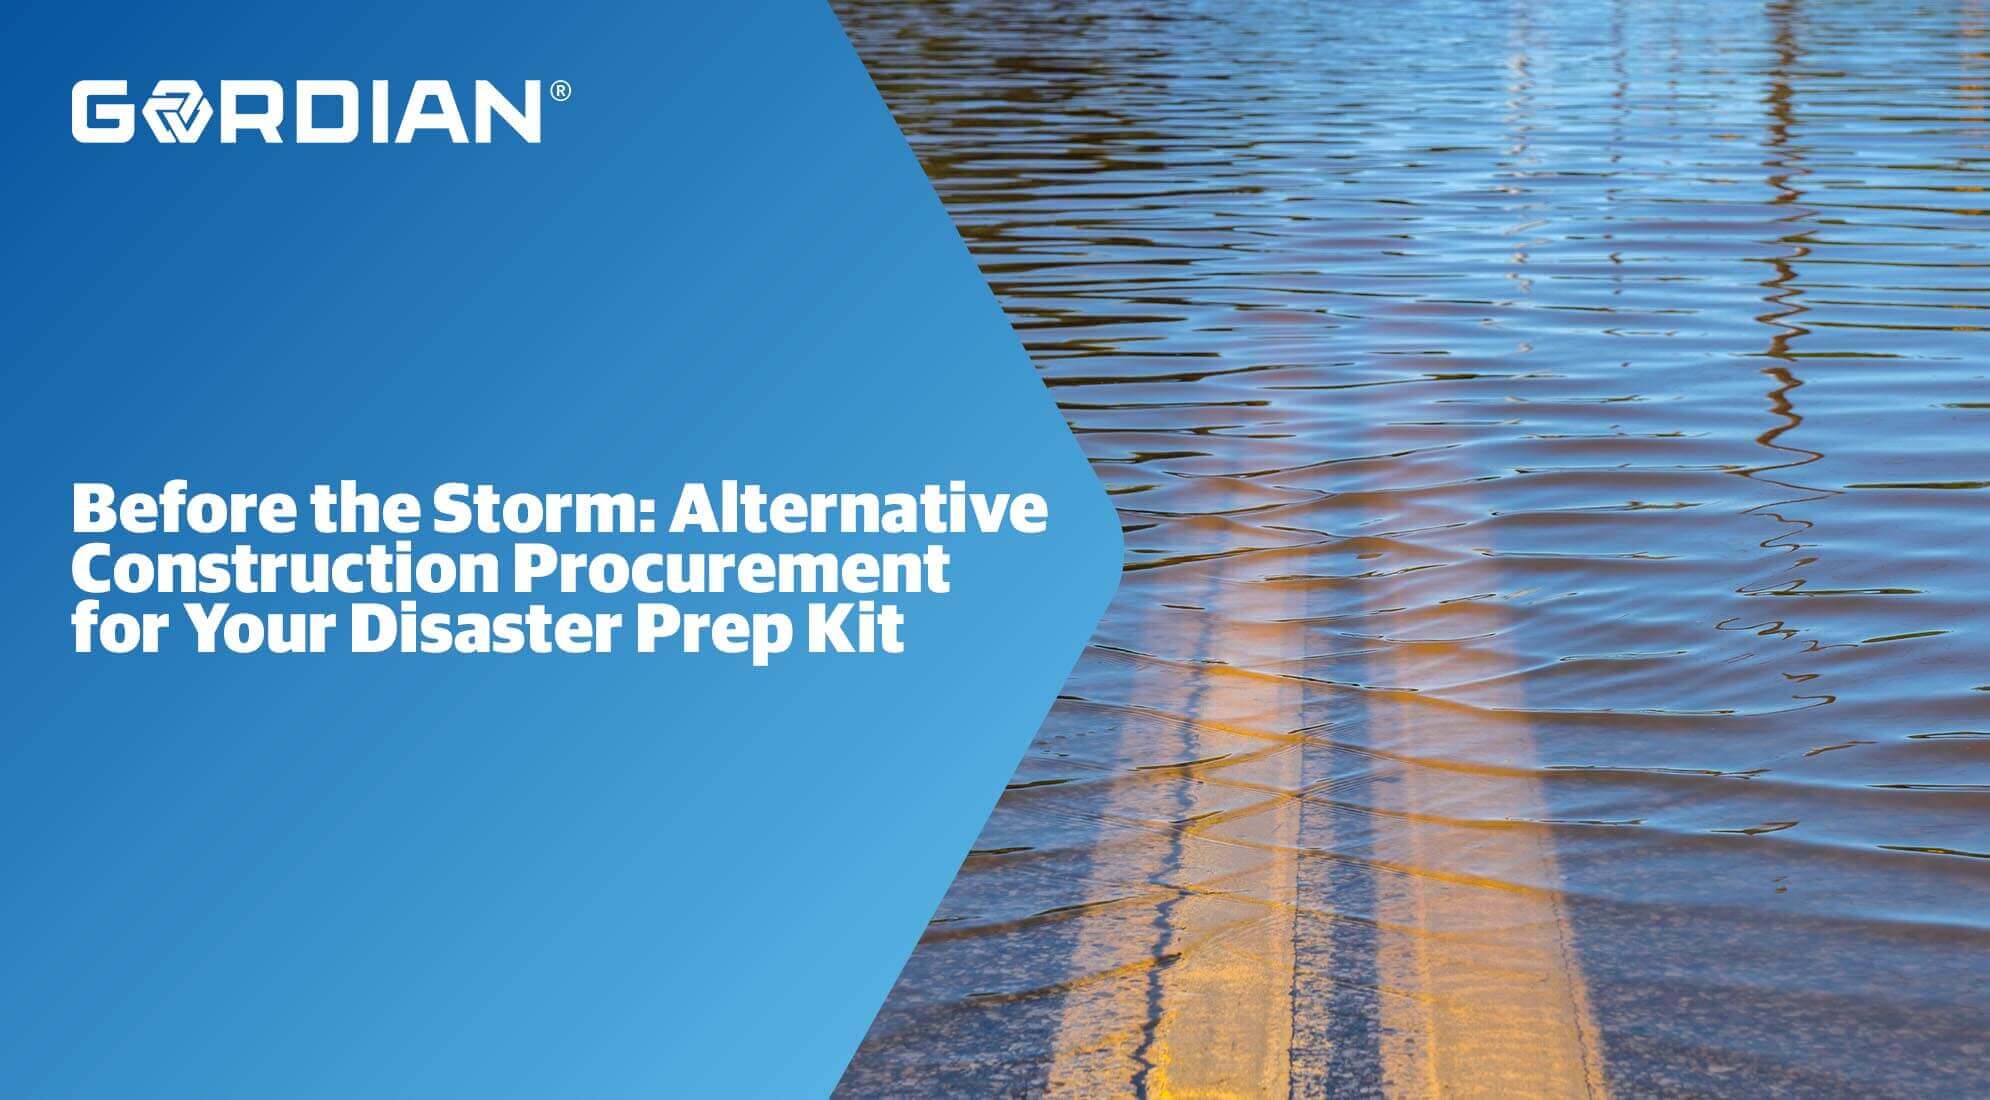 Before the Storm: Alternative Construction Procurement for Your Disaster Prep Kit 3